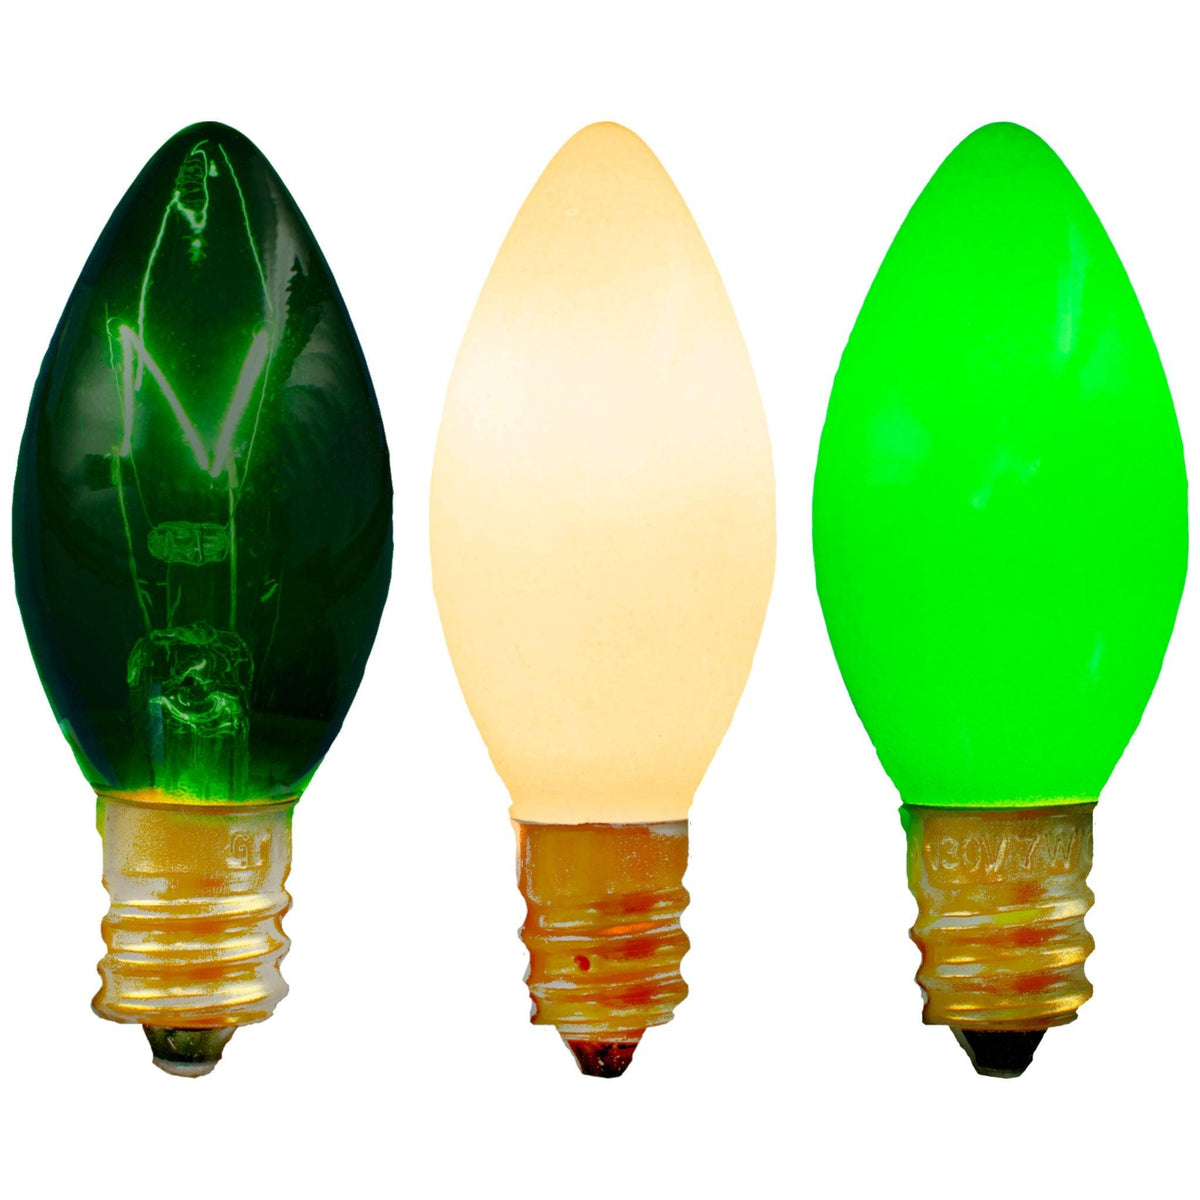 Introducing Lee Display's brand new C7/C9 Candelabra Style St. Patrick's Day Themed Light Sets on sale now at leedisplay.com